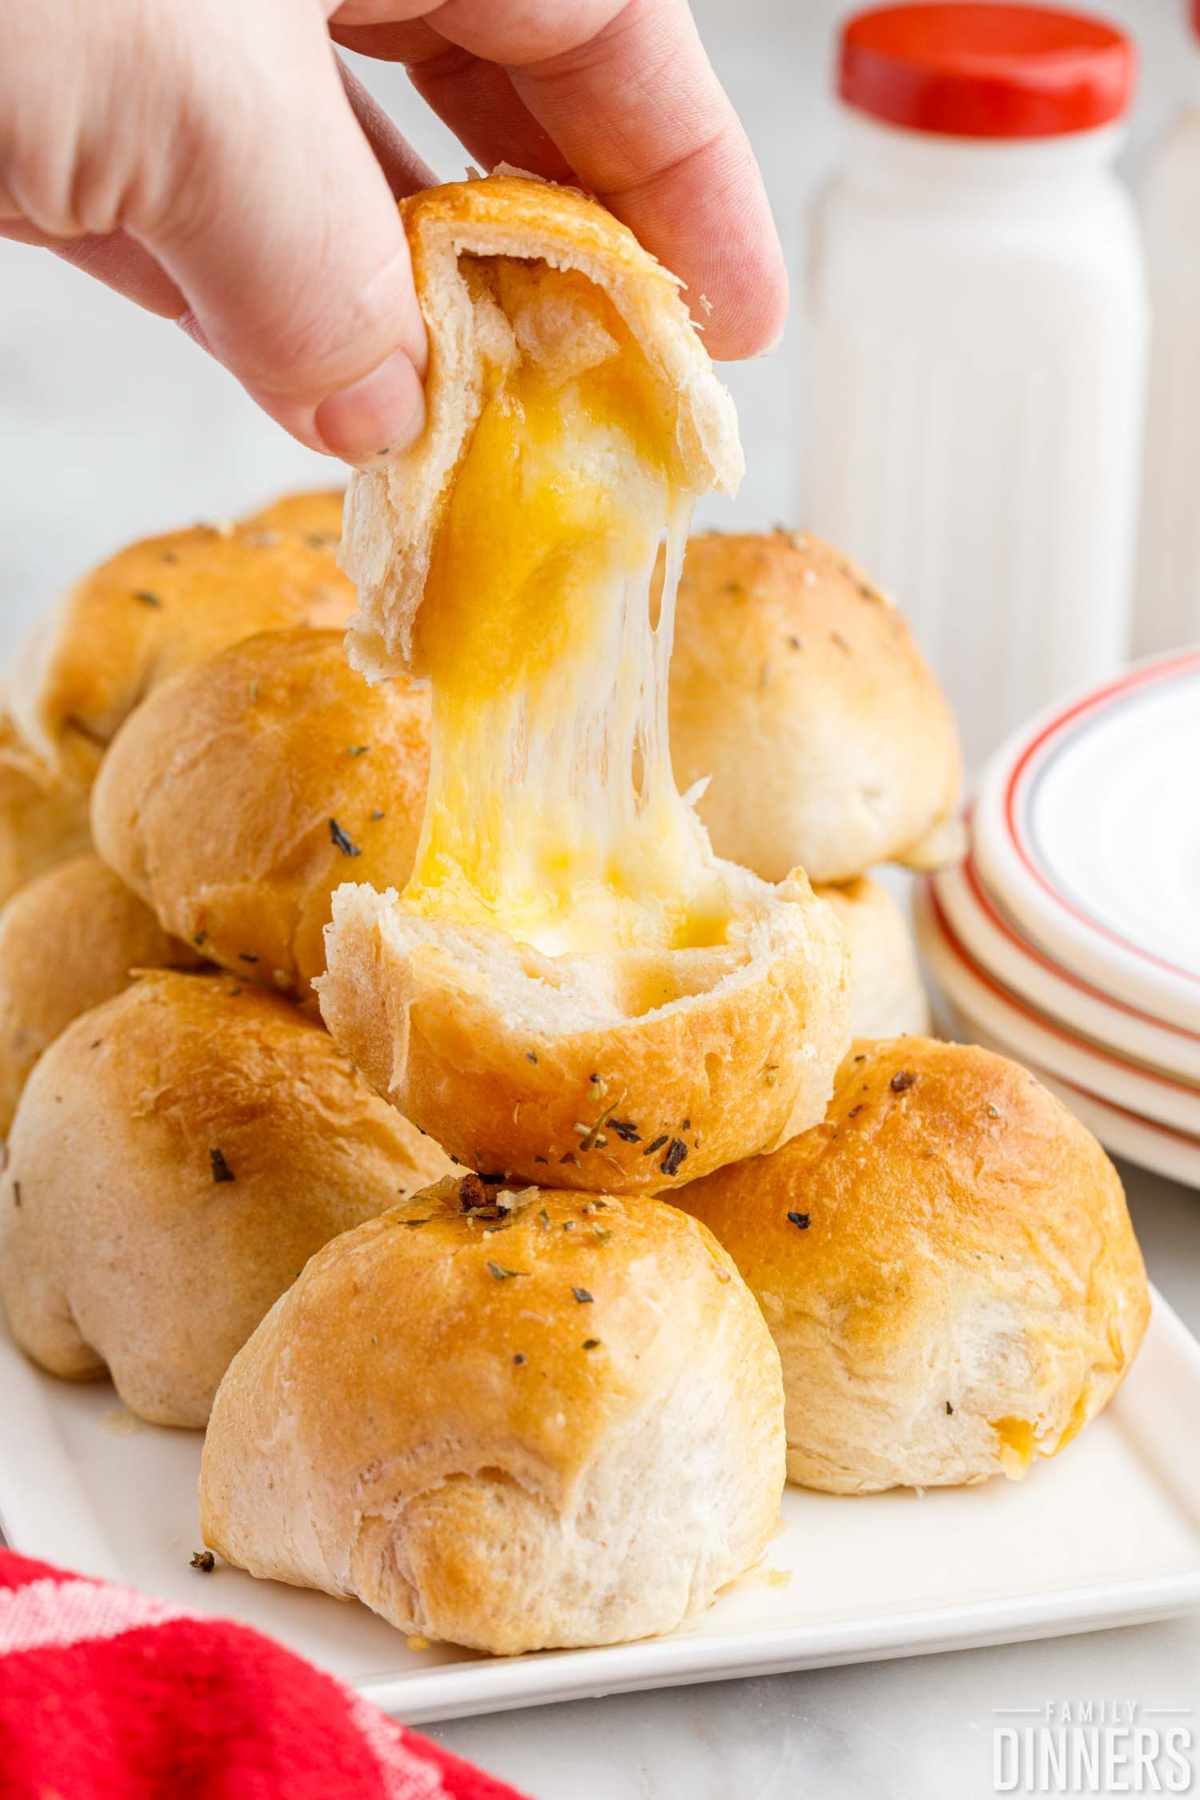 Hand holding an opened 3 cheese biscuit bomb with melted cheese pulling out.